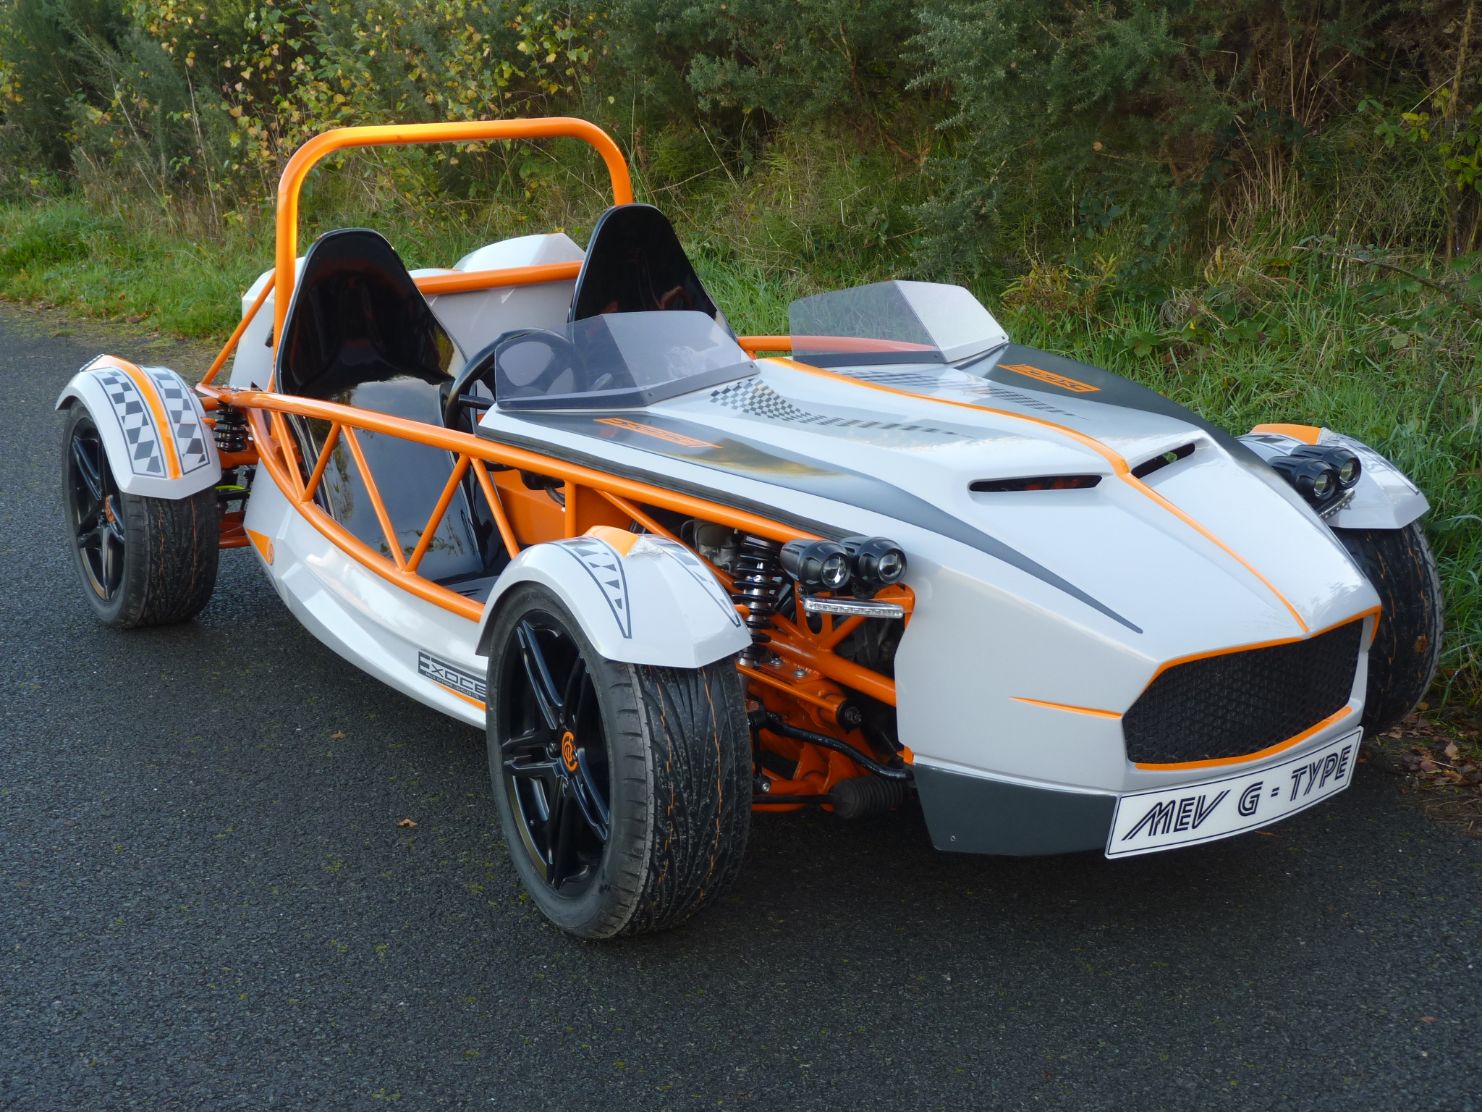 Mev Exocet specs and price